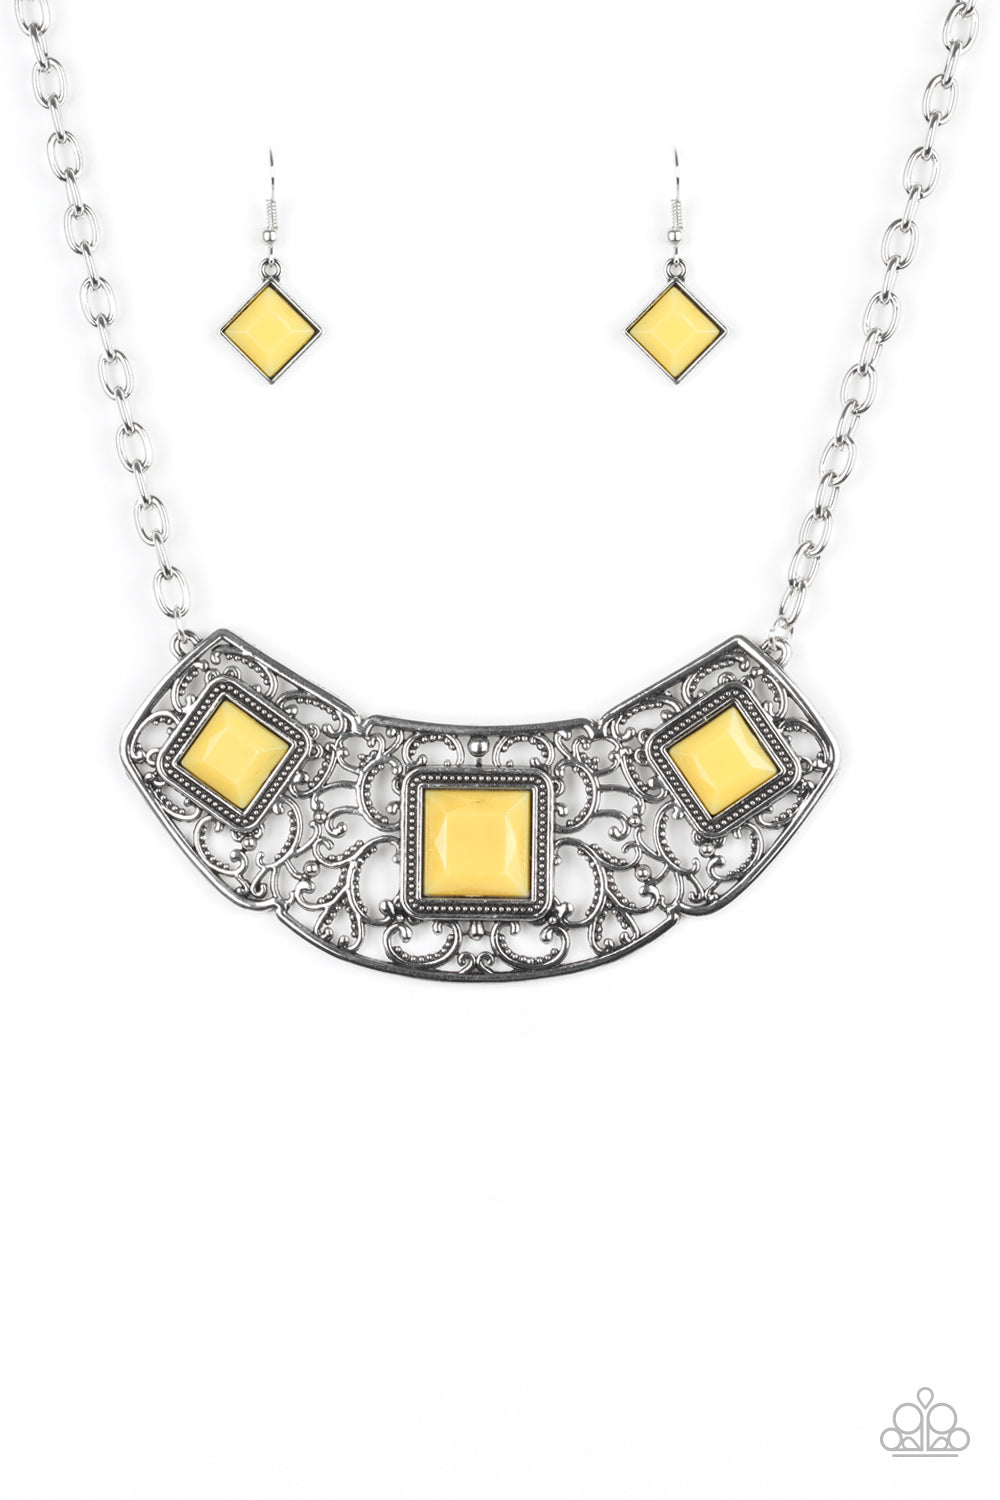 Glistening silver filigree spins into a dramatic pendant below the collar. Square yellow beads are pressed into the airy frame for a colorful finish. Features an adjustable clasp closure.